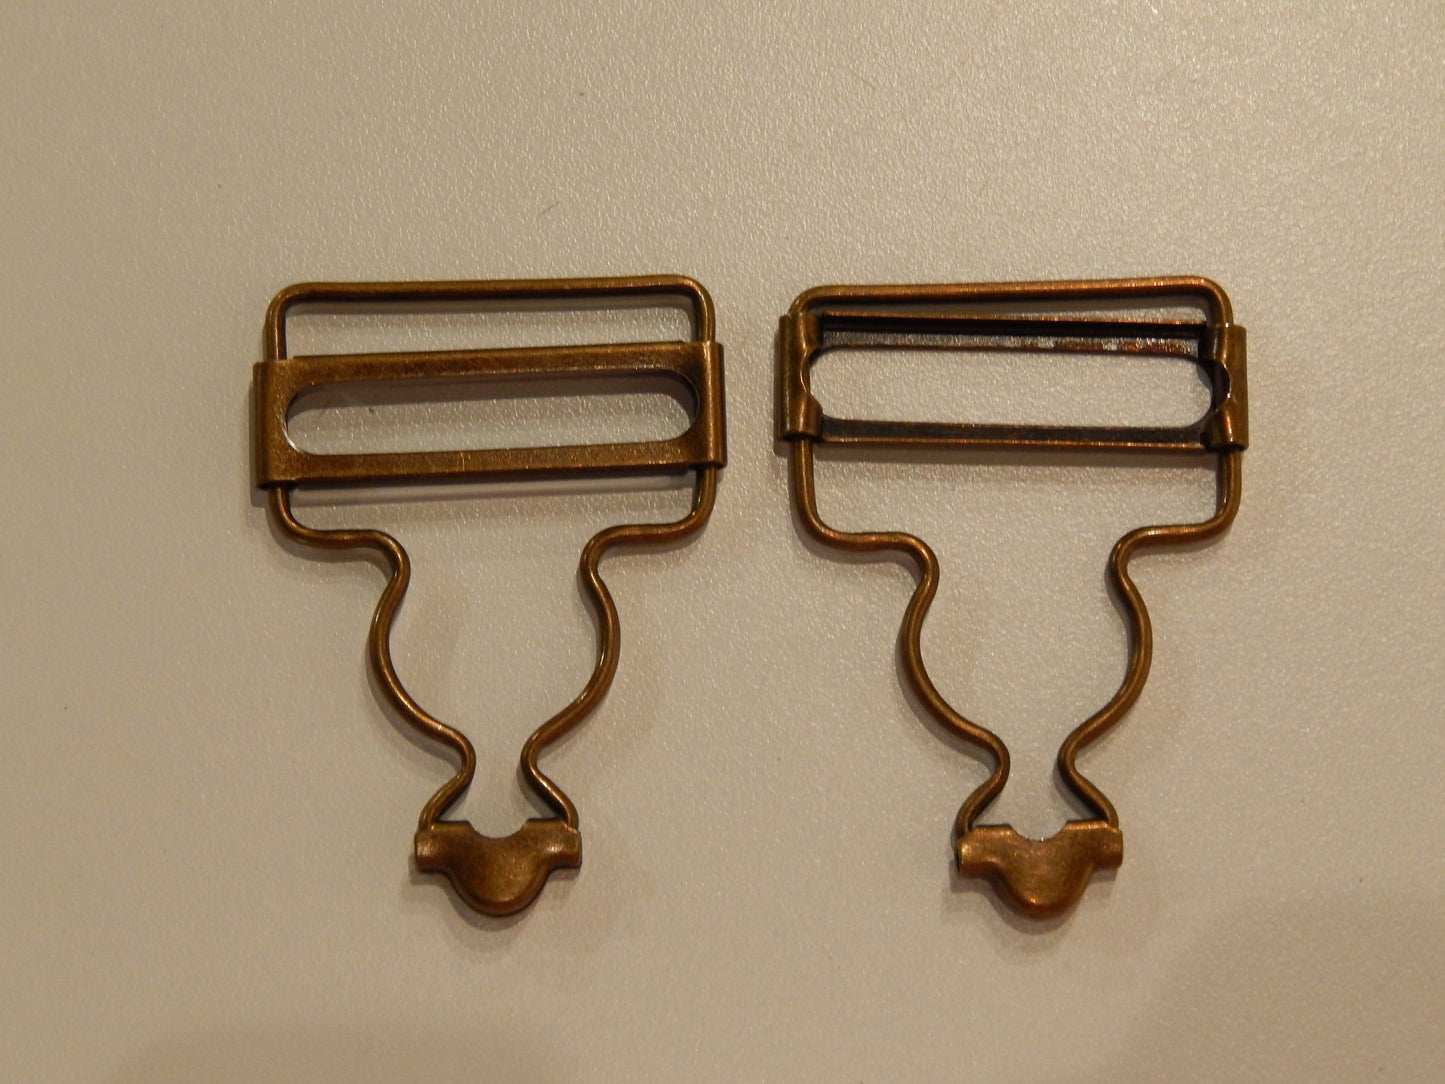 Burnished Brass Overall Fastener